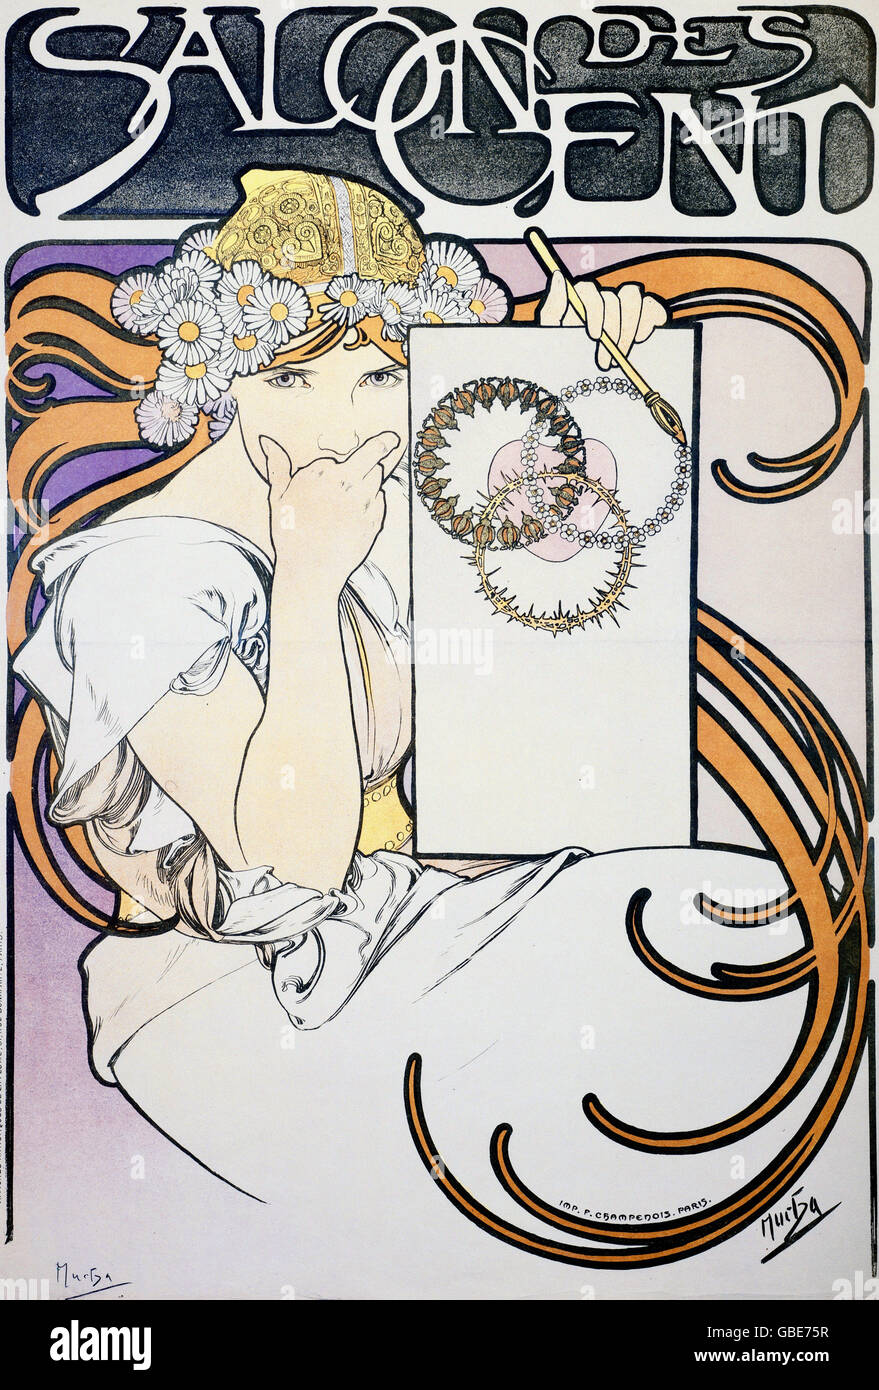 Salon des Cent exhibition, advertising by Alfons Mucha, 1890 Stock Photo